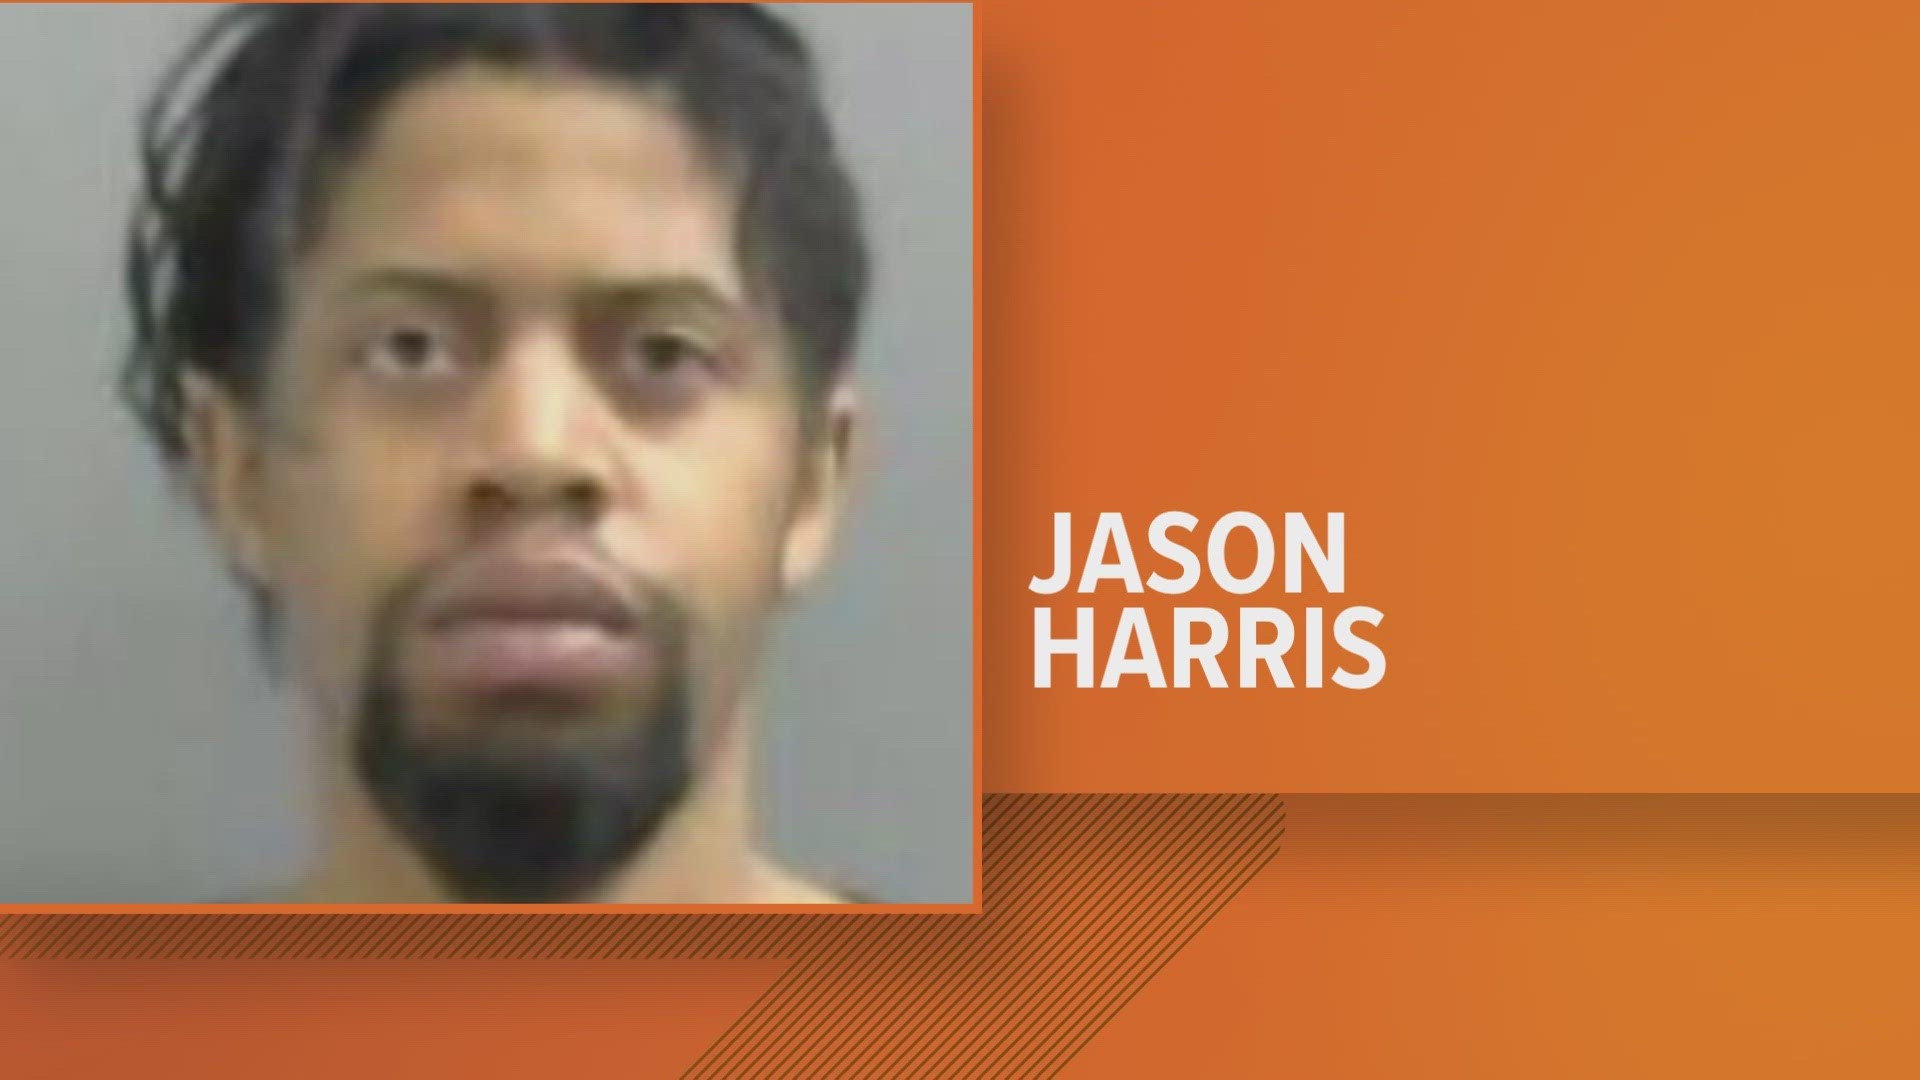 A Delaware County jury found 34-year-old Jason Harris guilty of murder and other charges Monday for the 2022 shooting death of a man in Muncie.